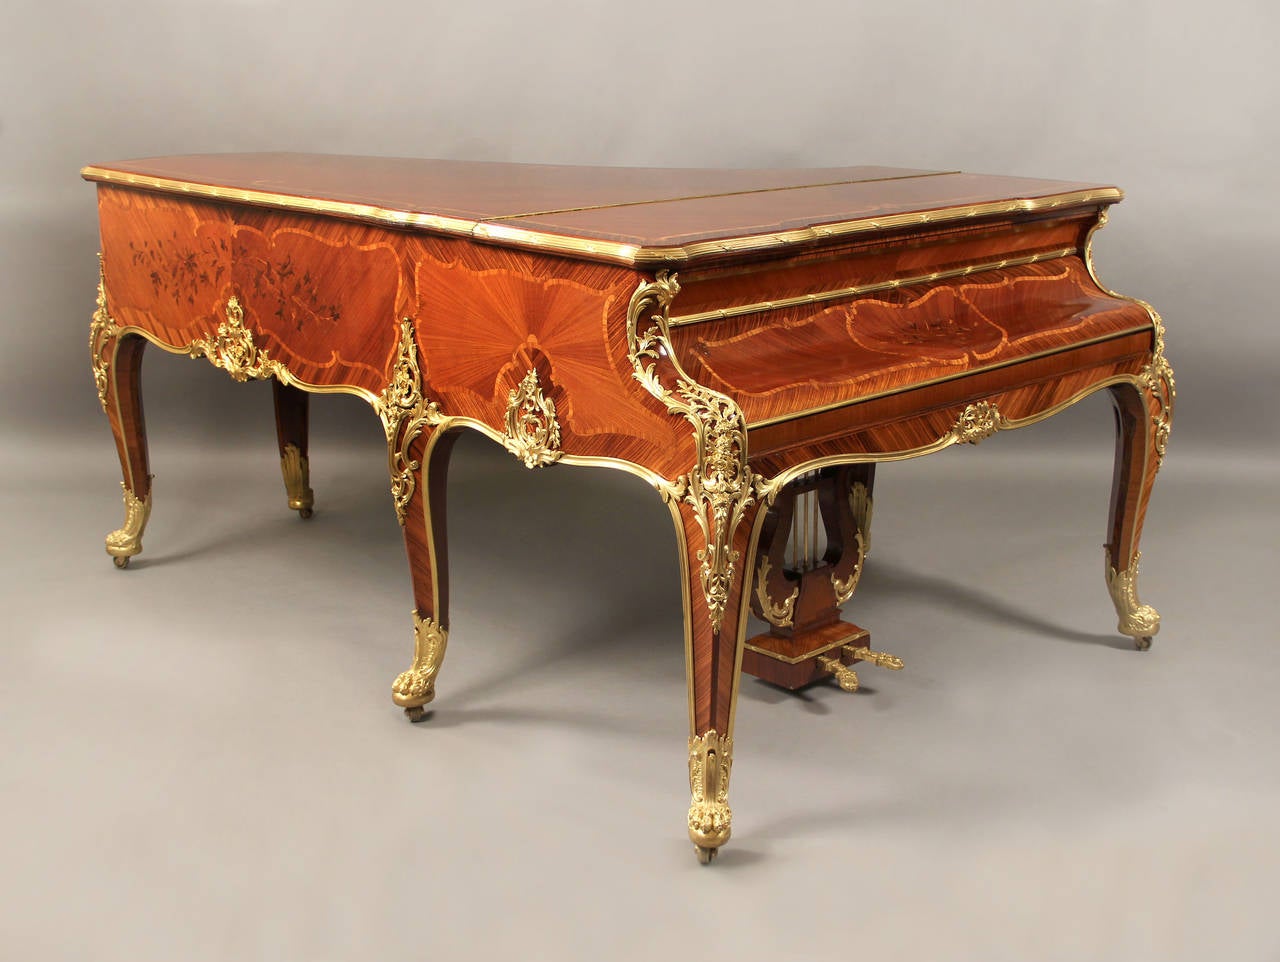 A fantastic quality early 20th century Louis XV style gilt bronze-mounted marquetry six-leg grand Erard piano.

By François Linke.

Beautiful sunburst veneer with inlaid floral marquetry designs. Great quality floral bronze mounts running down each